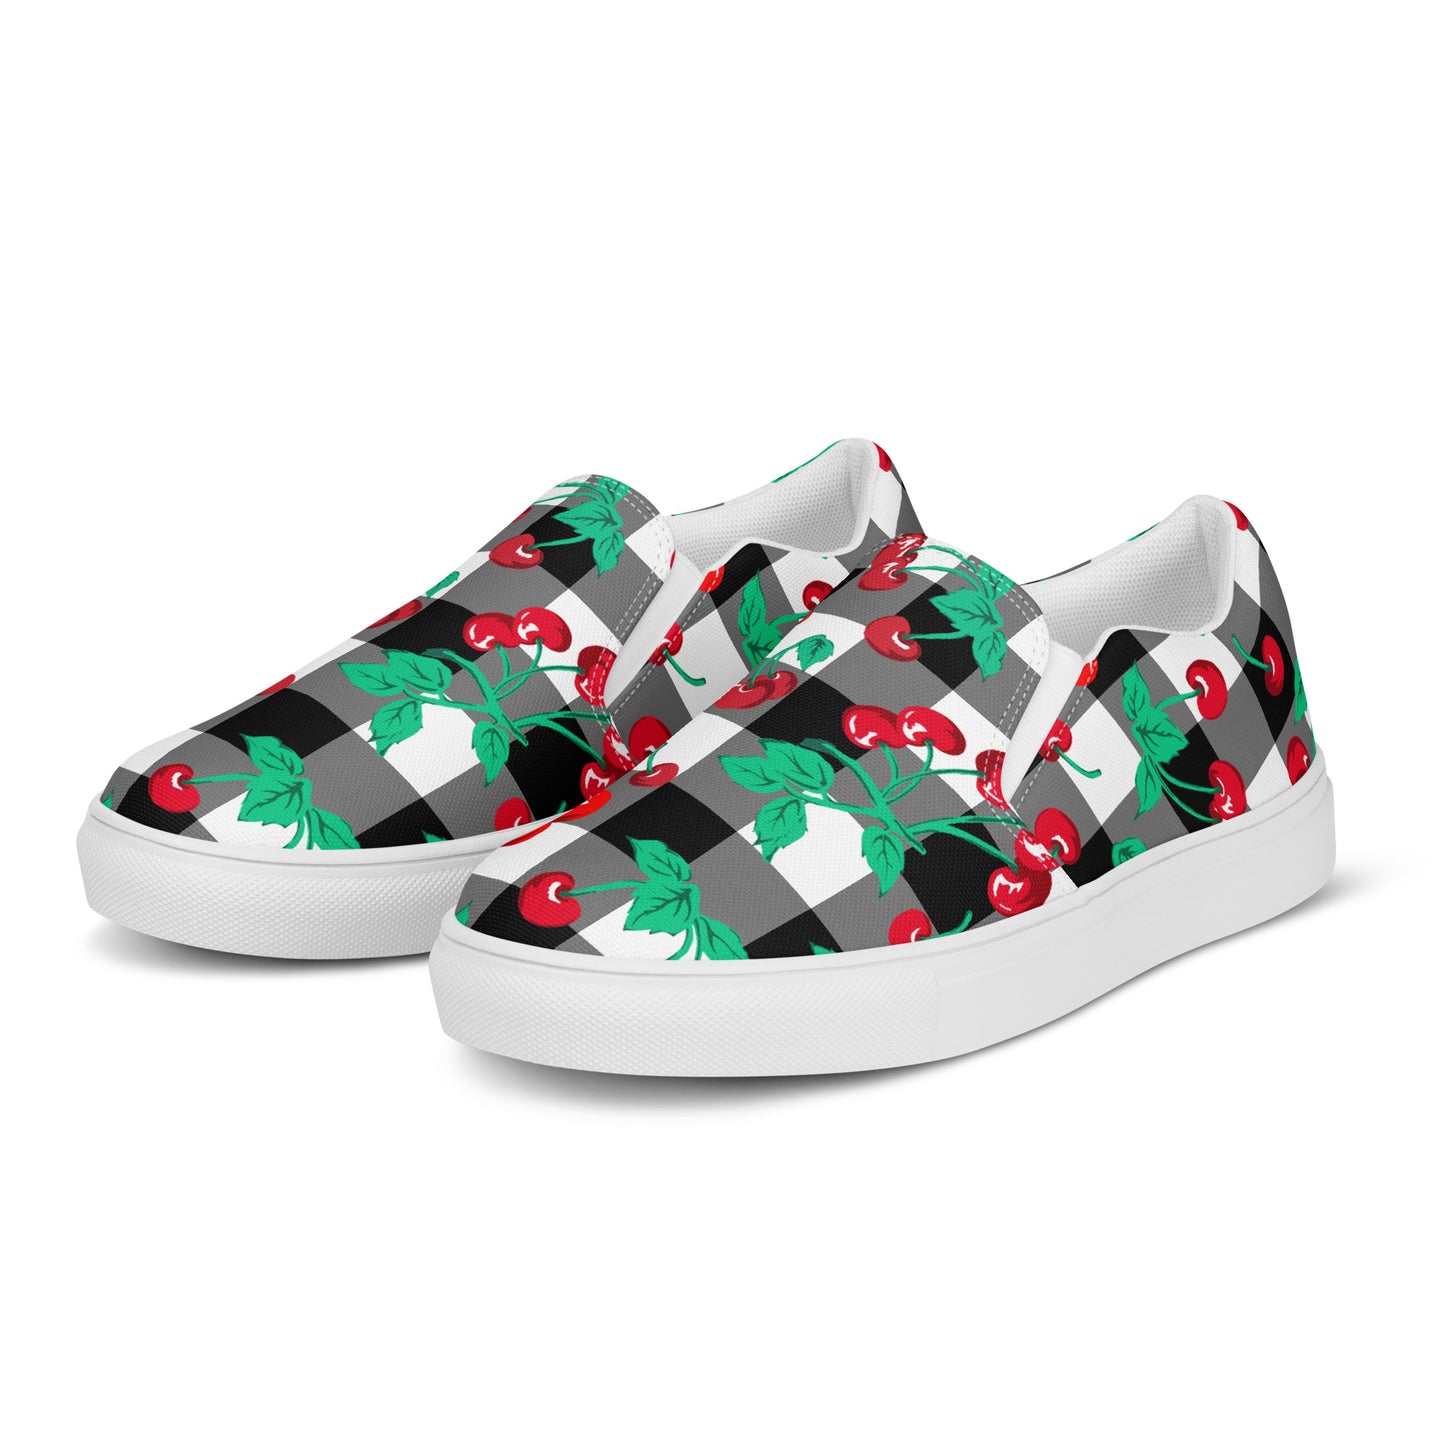 Black Gingham Cherry Girl Women’s Canvas Slip-On Deck Shoes | Pinup Couture Relaxed